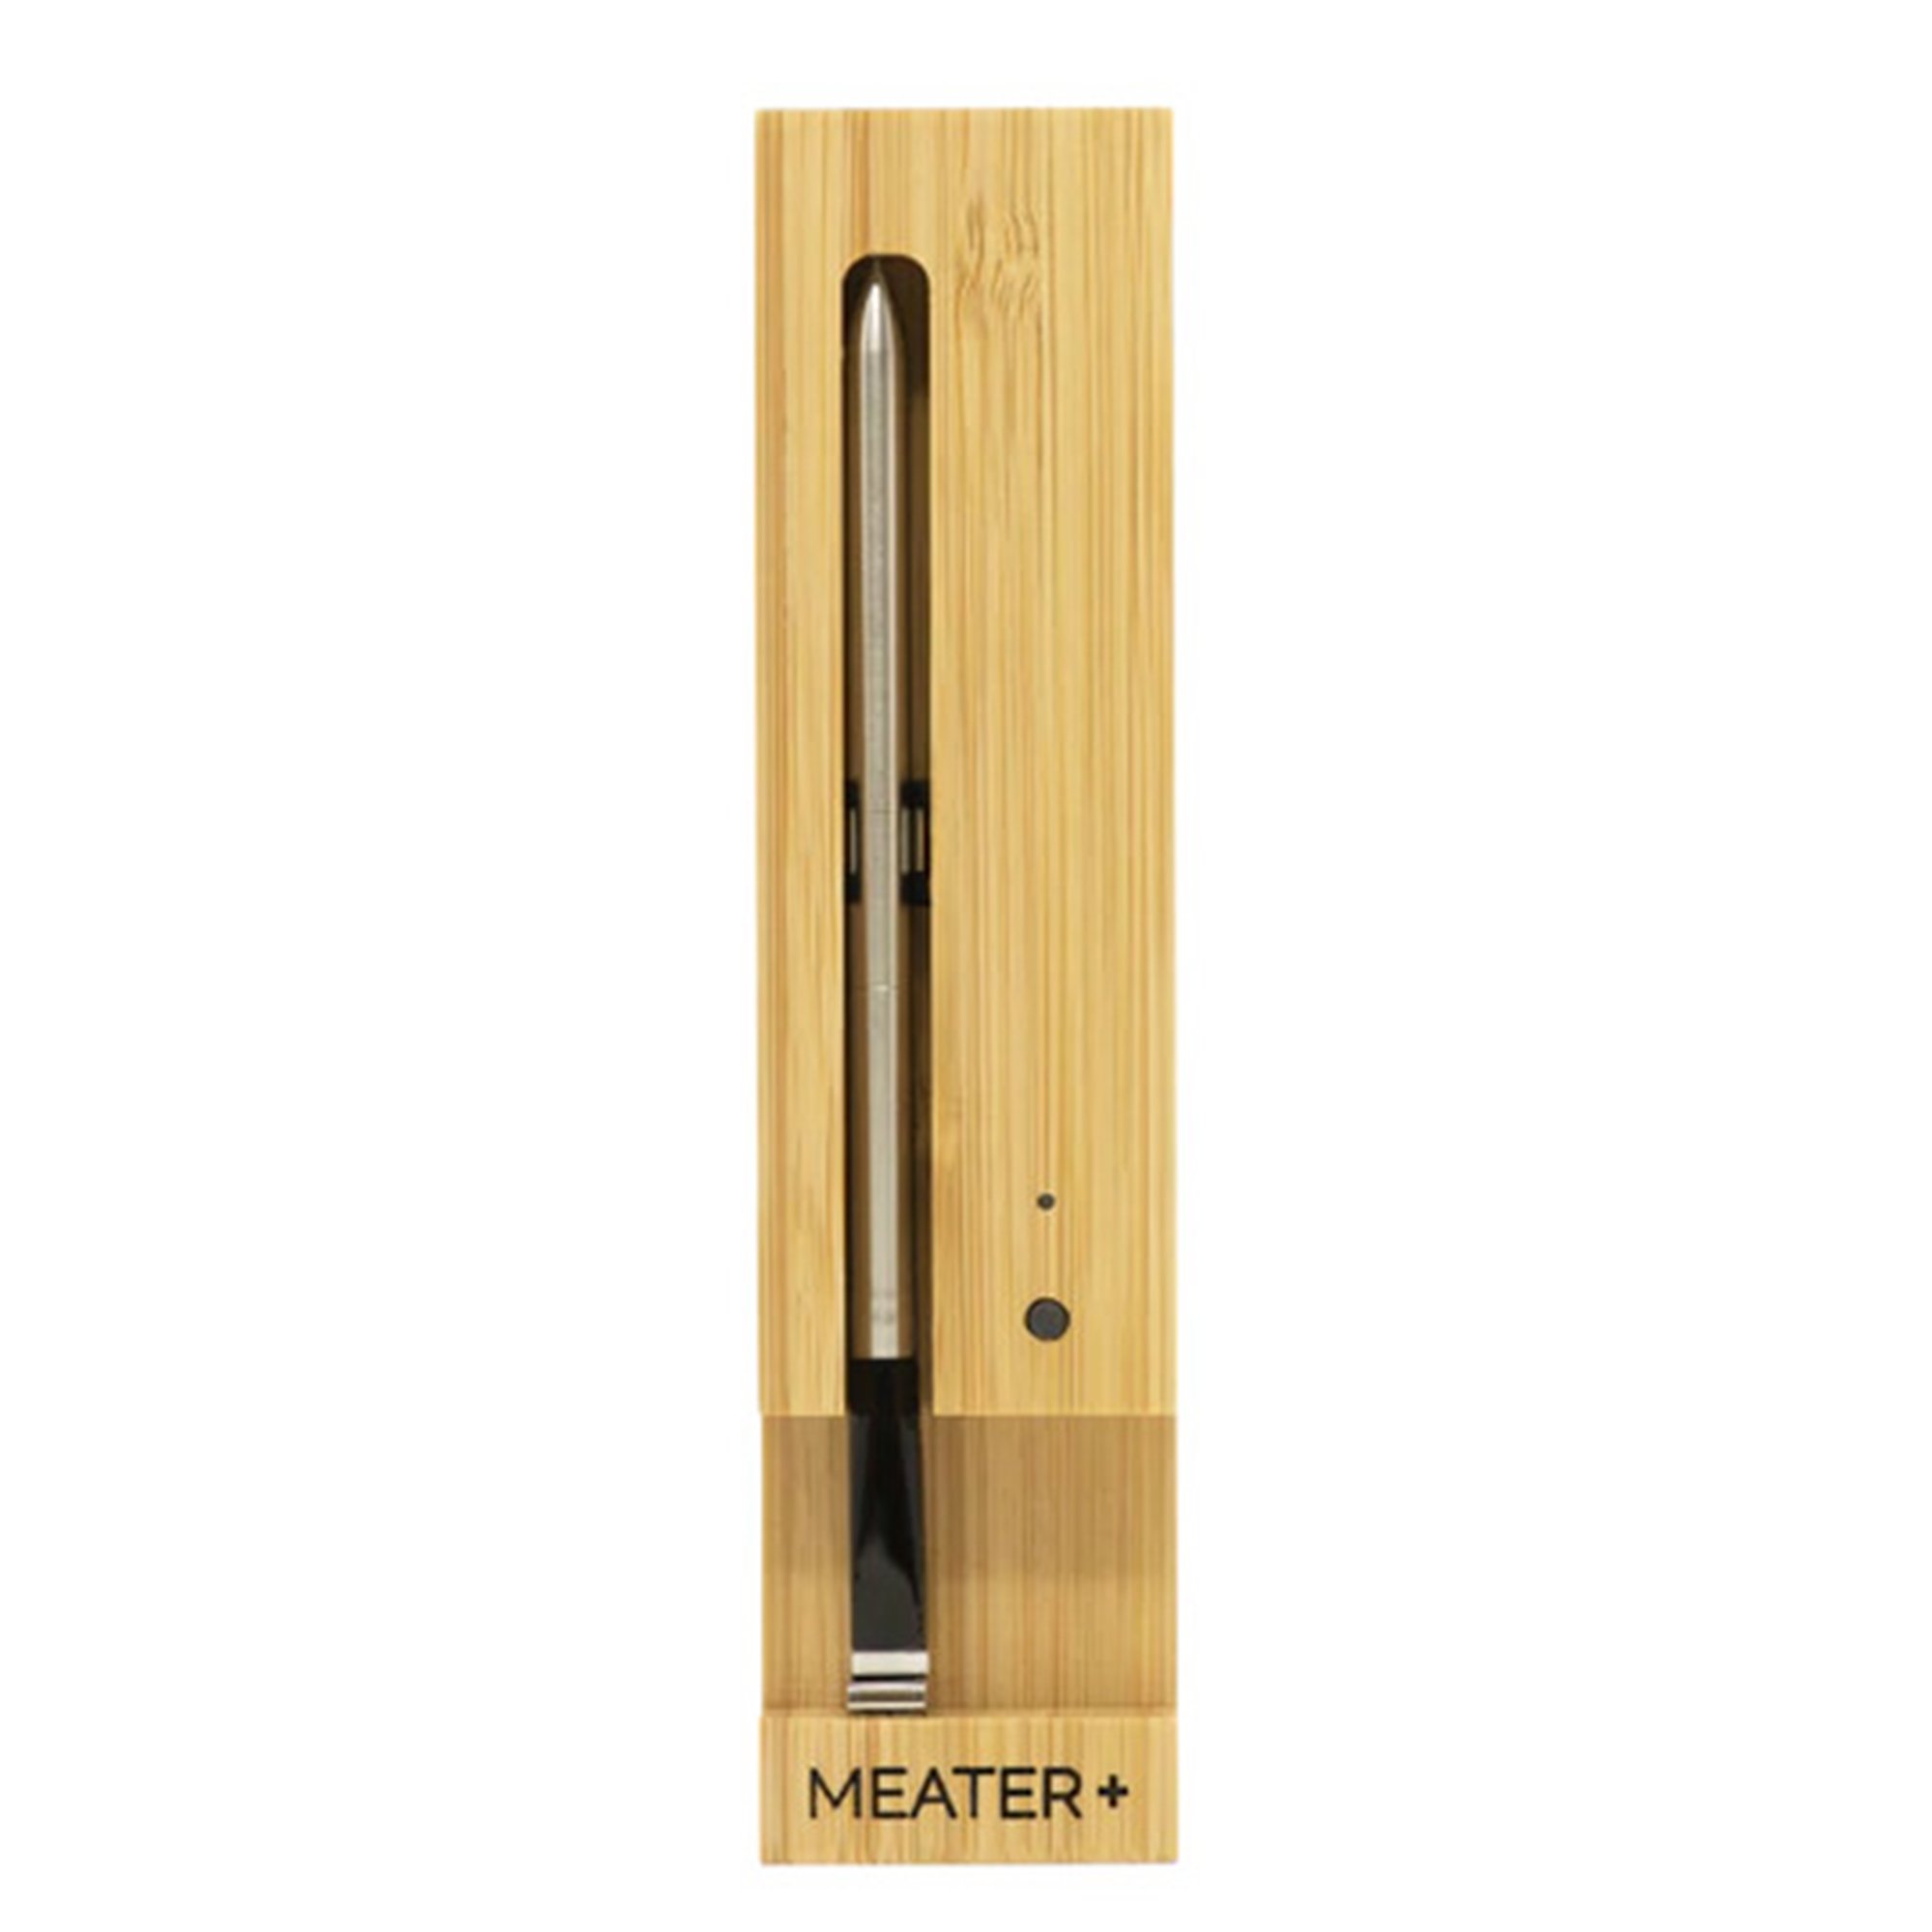 https://store.themeateater.com/on/demandware.static/-/Sites-meateater-master/default/dwf86cdb06/meater-plus-bluetooth-thermometer/meater-plus-bluetooth-thermometer_global_primary.jpg